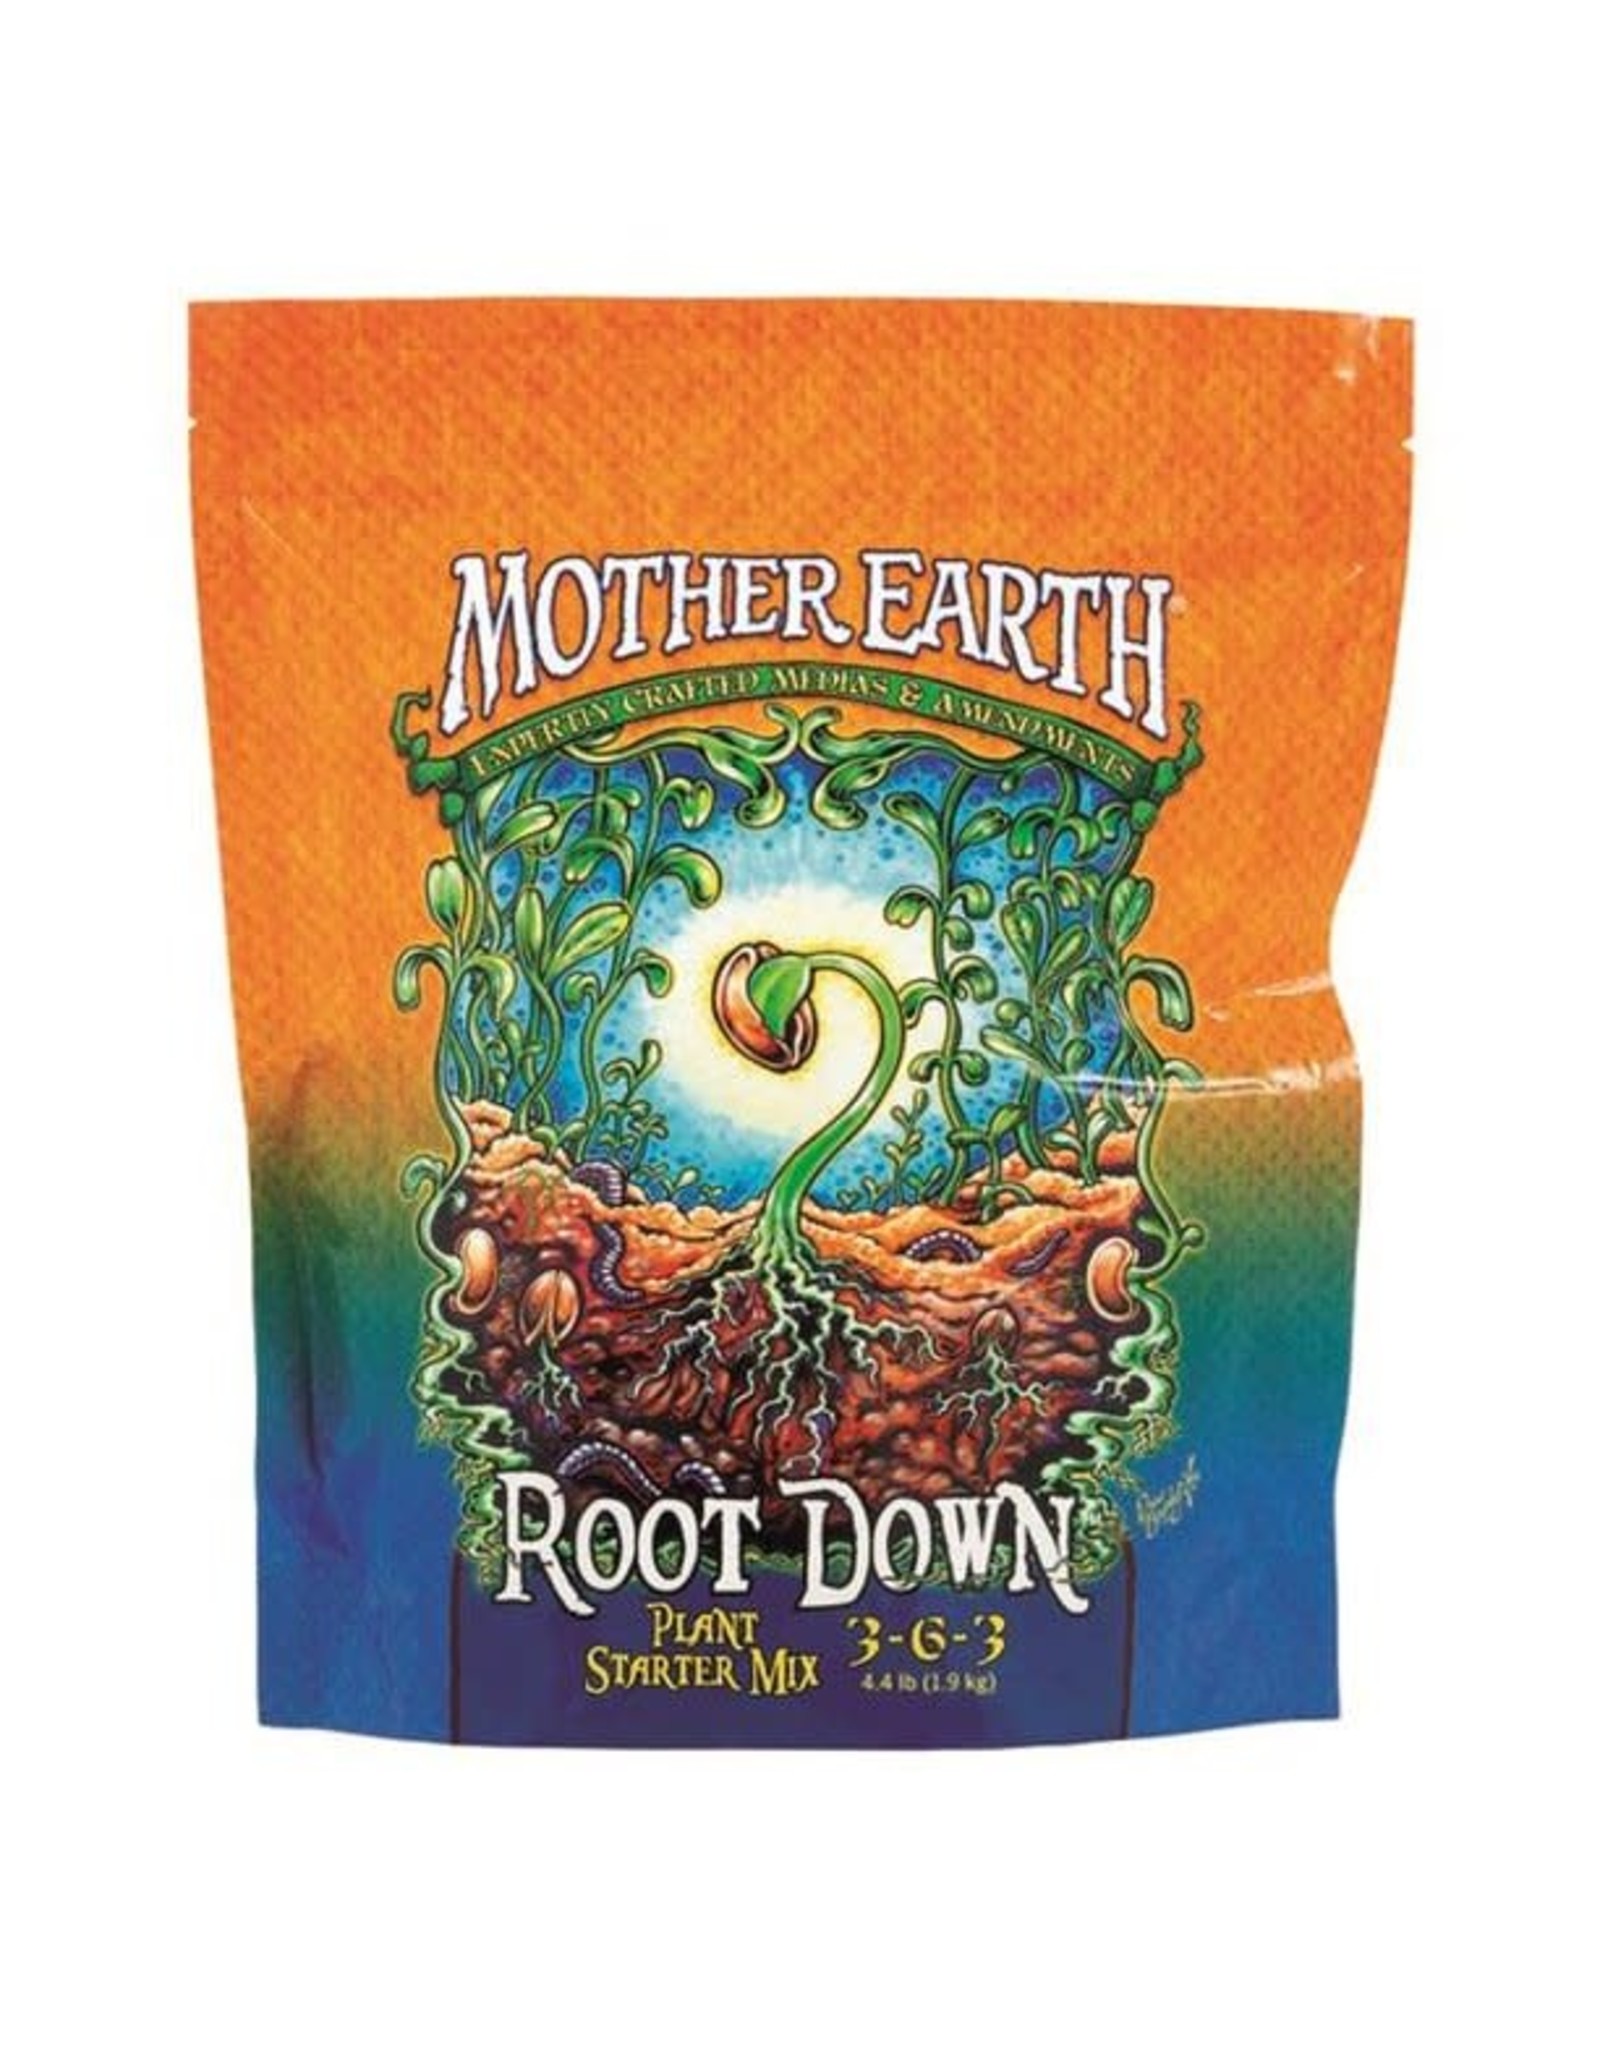 Mother Earth Mother Earth Root Down Starter Mix 3-6-3